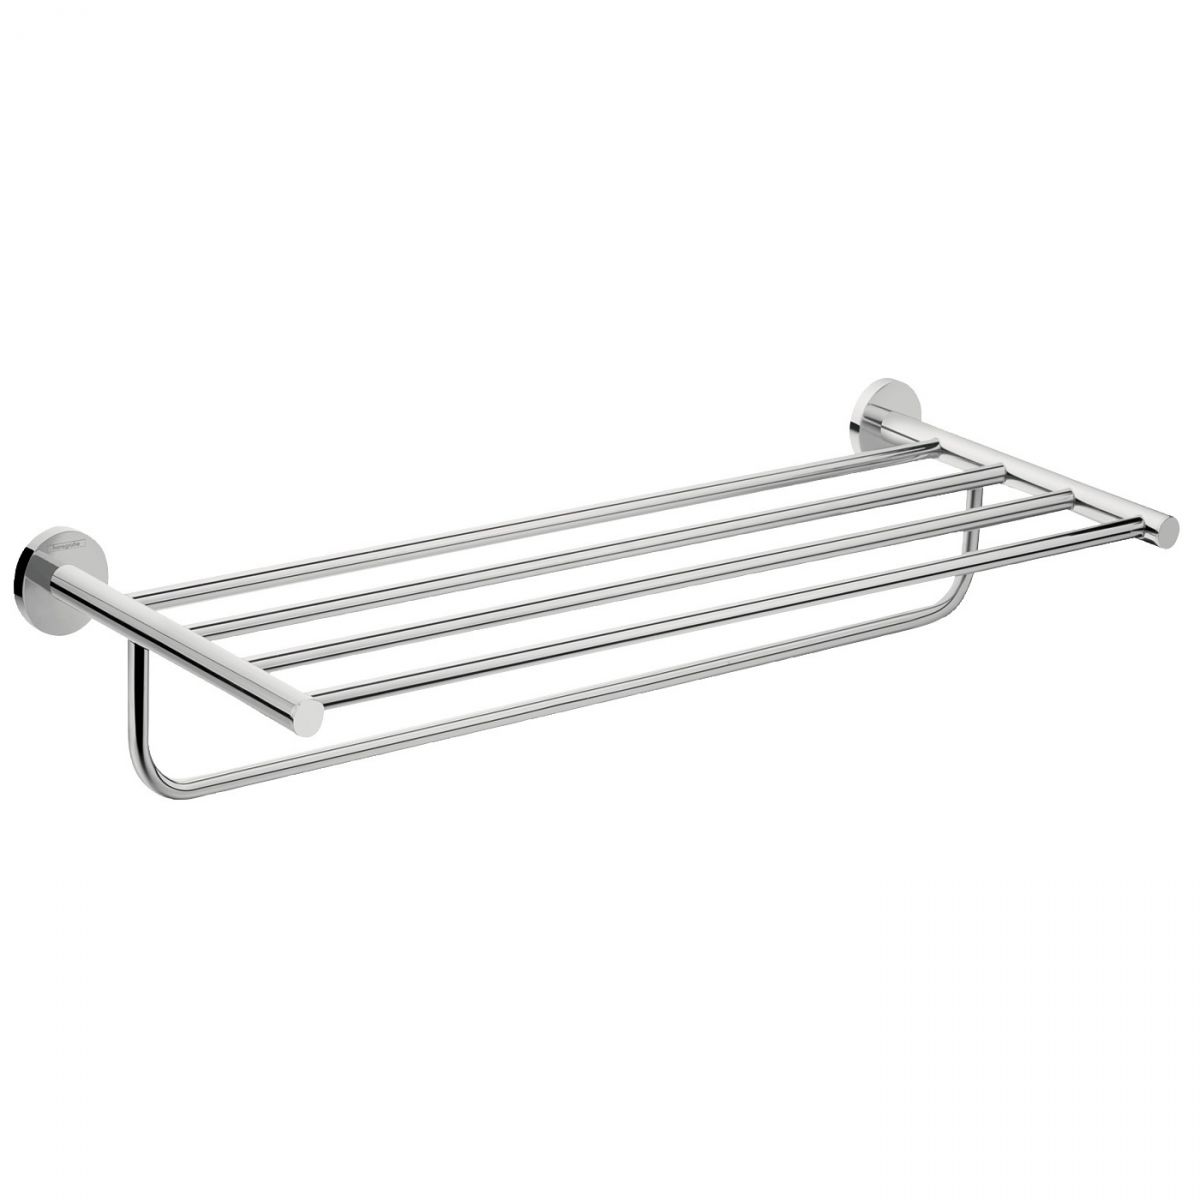 Hansgrohe Logis Universal Towel Rack with Towel Holder 